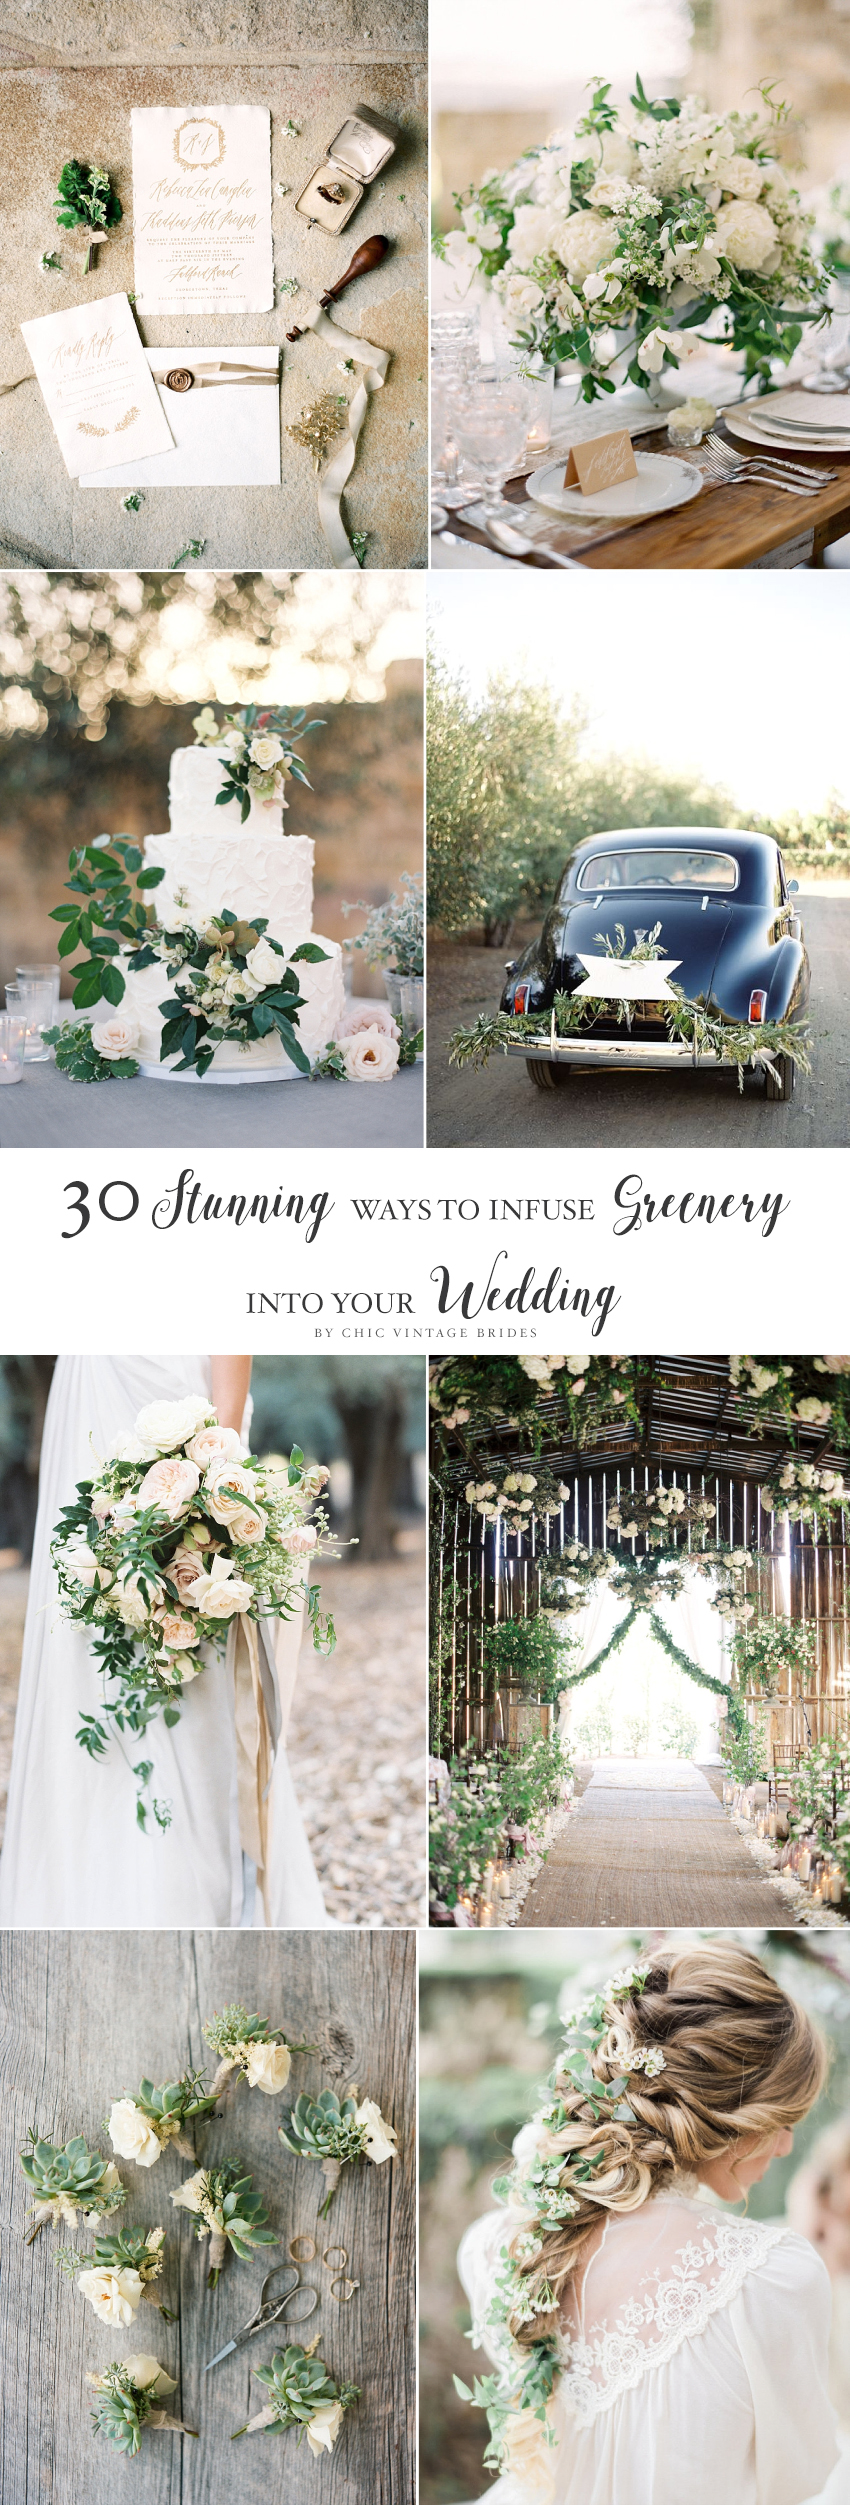 30 Stunning Ways to Infuse your Wedding with Greenery